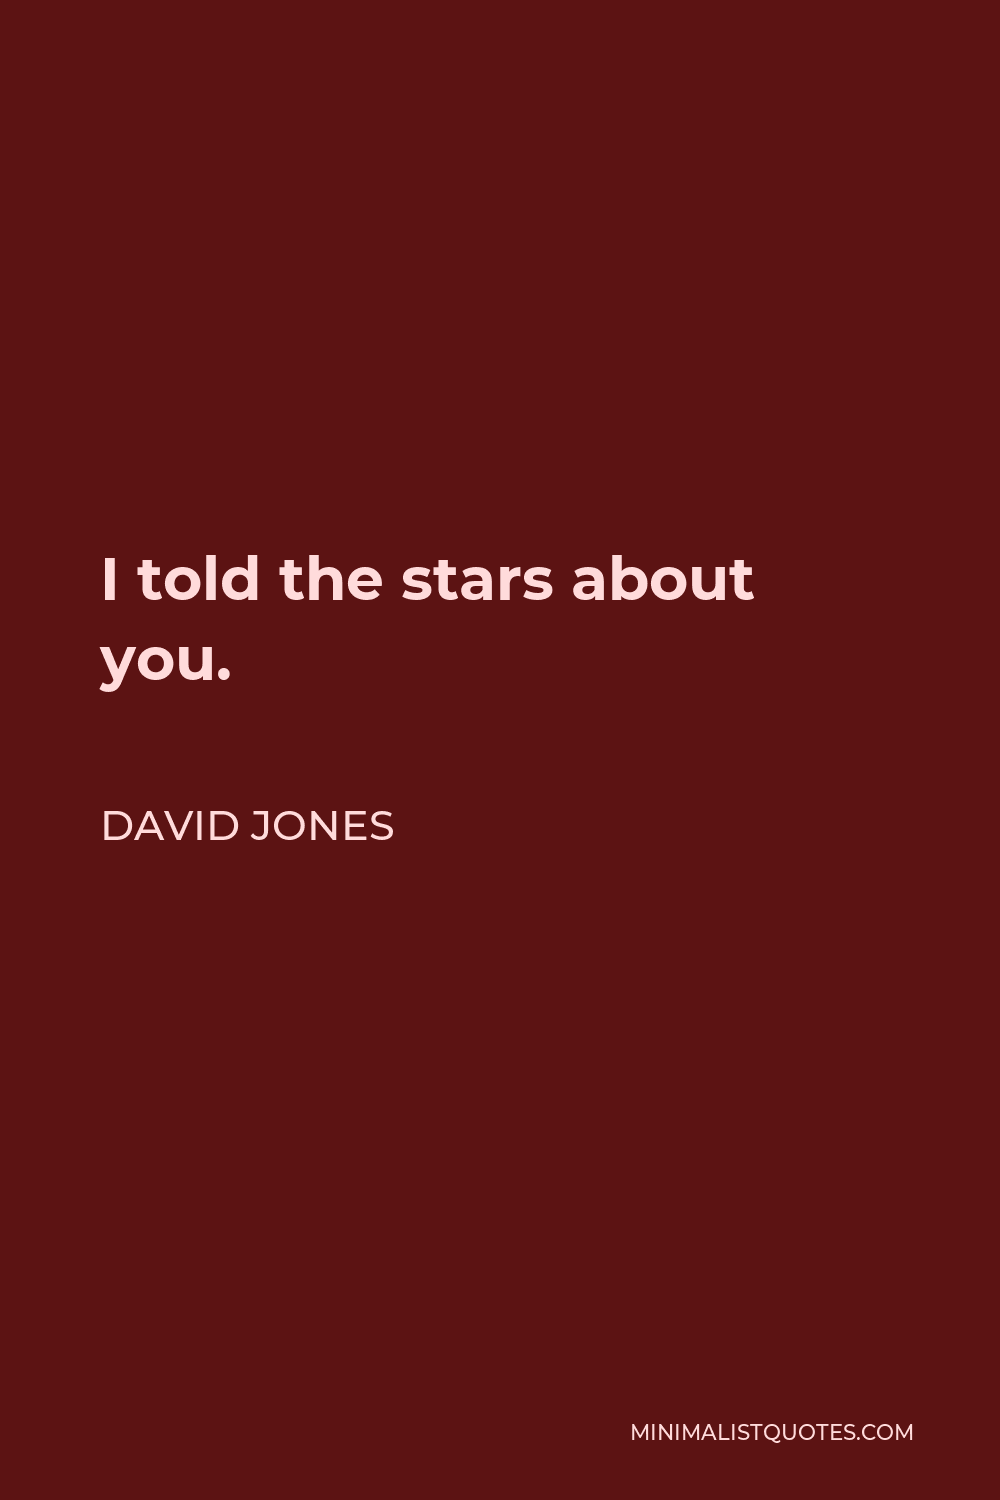 David Jones Quote - I told the stars about you.